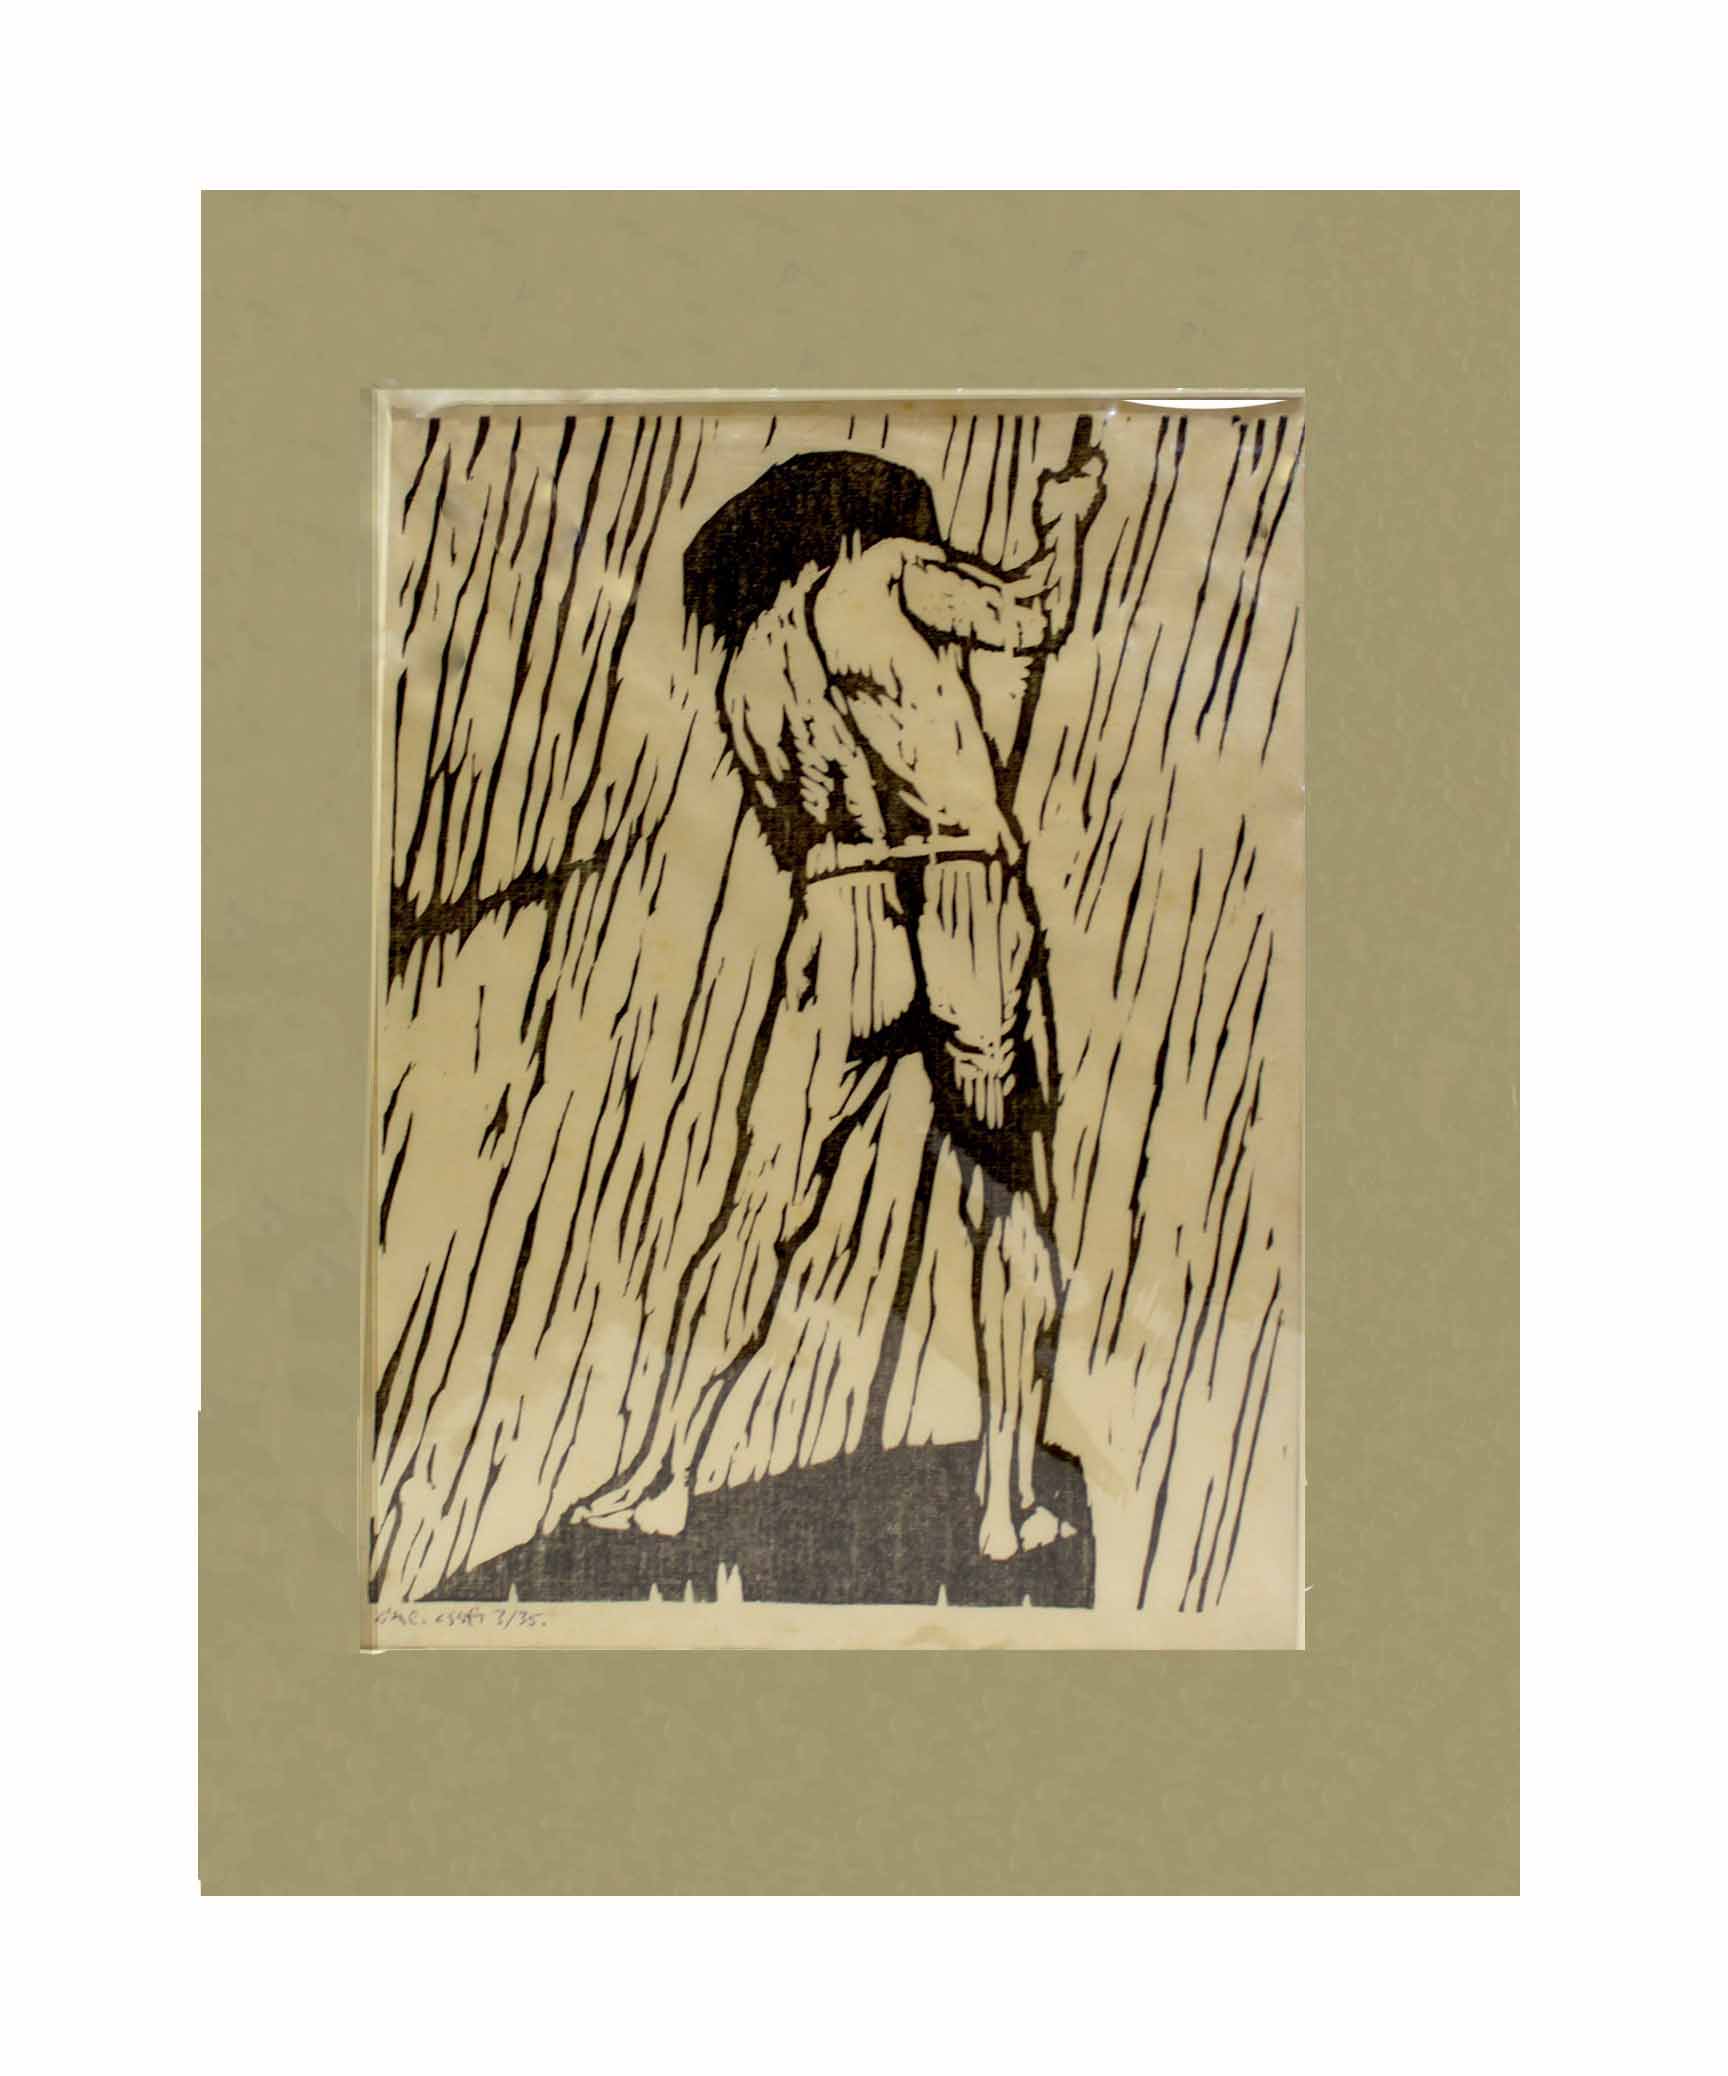 AR Gerald Anthony Coles (1929-2004), "Boatman", monotype, signed and numbered 3/35 in pen to lower